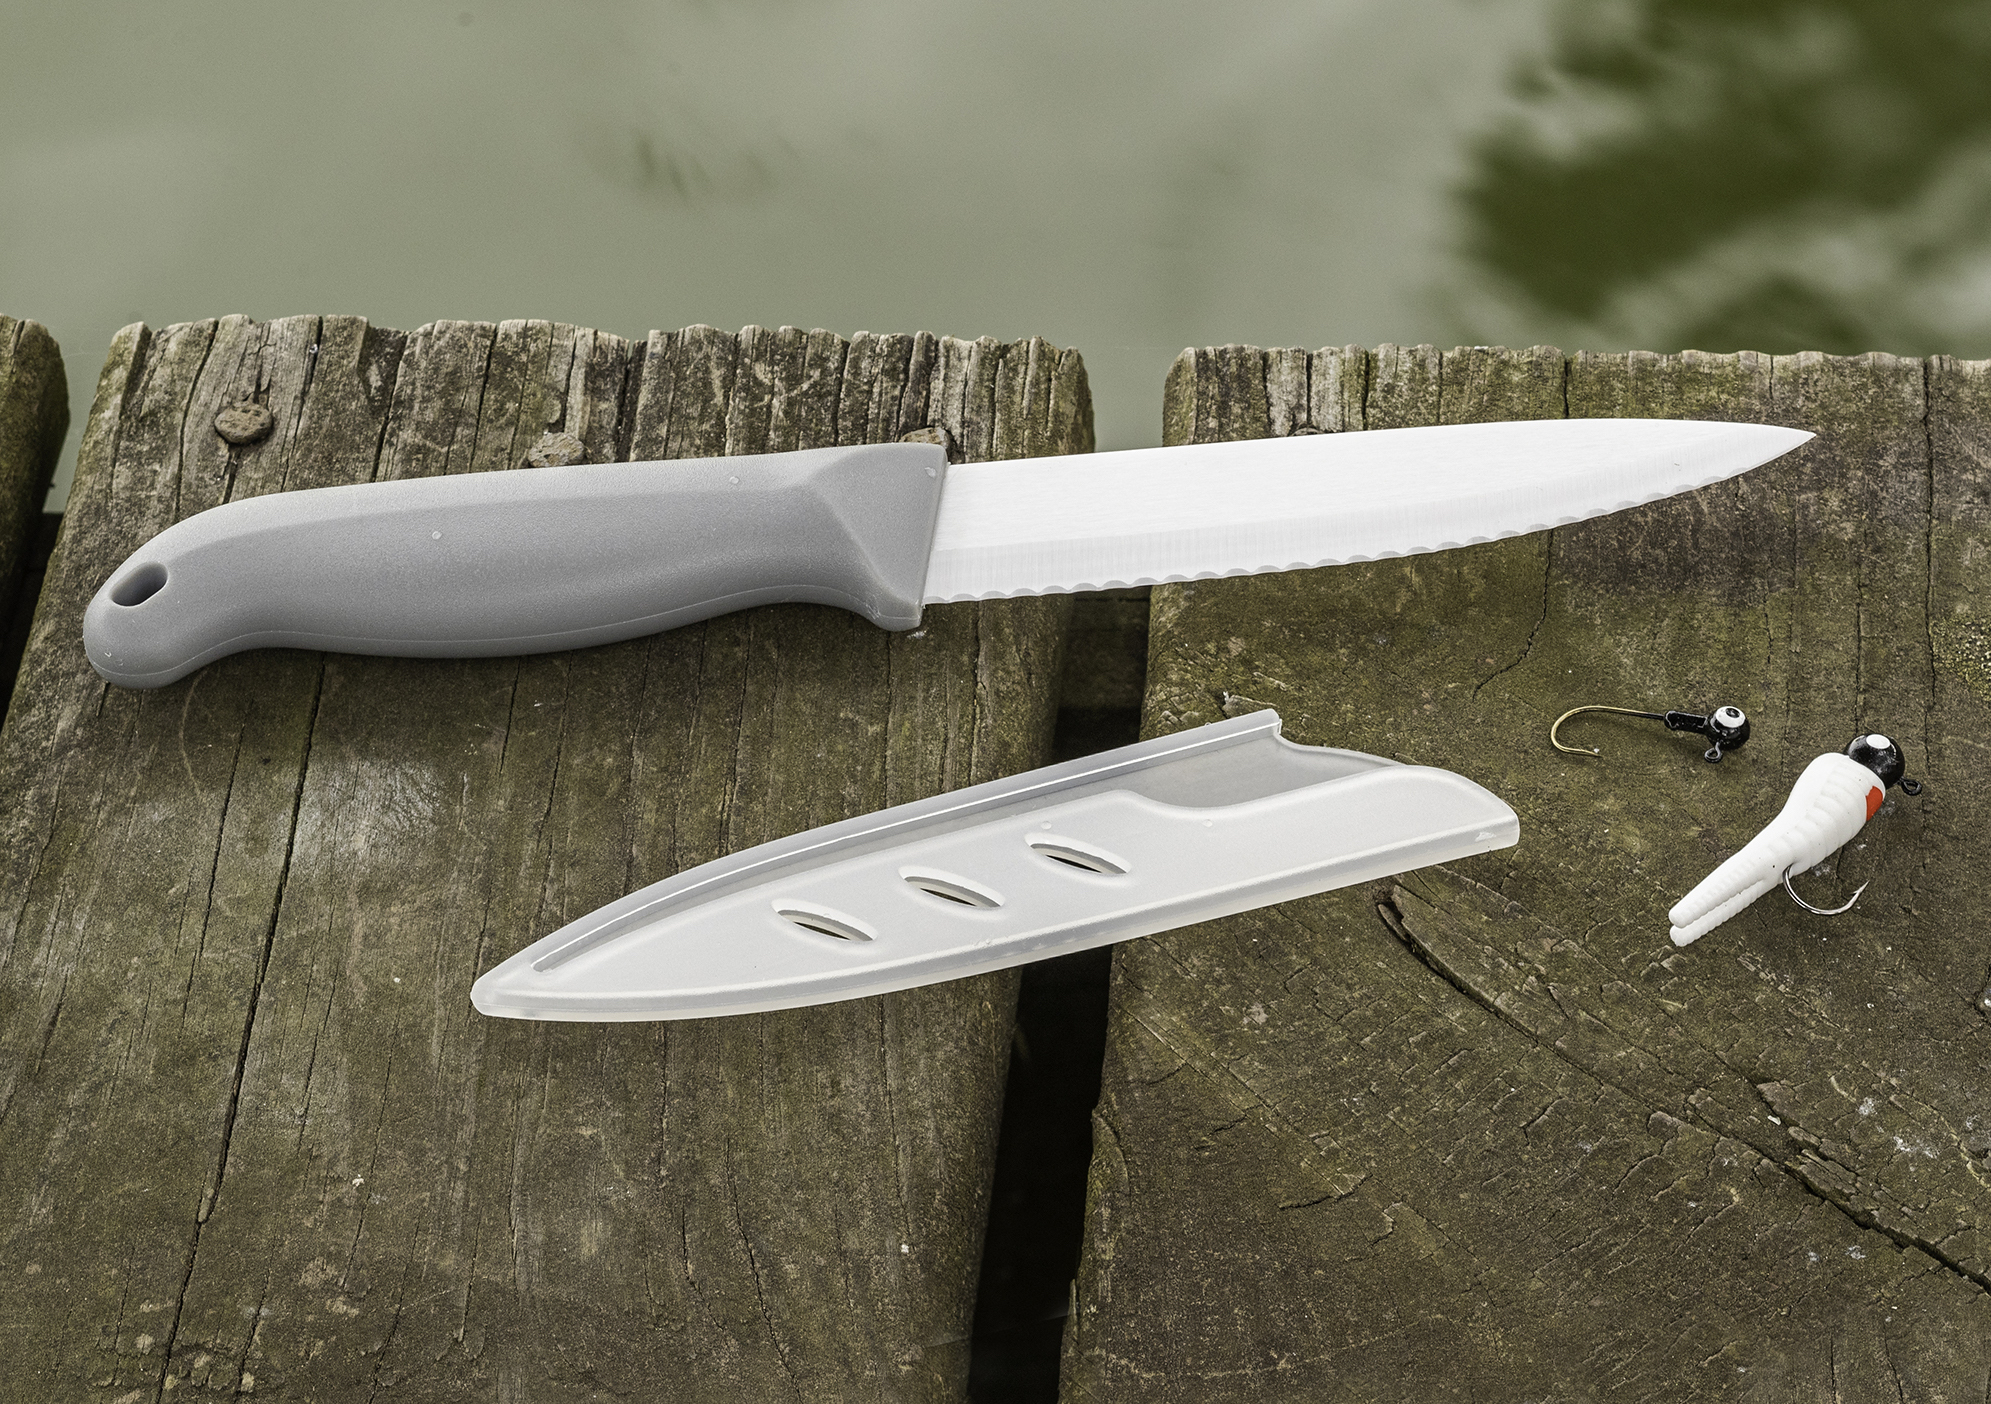 EVERYTHING YOU NEED TO KNOW ABOUT SERRATED KNIVES